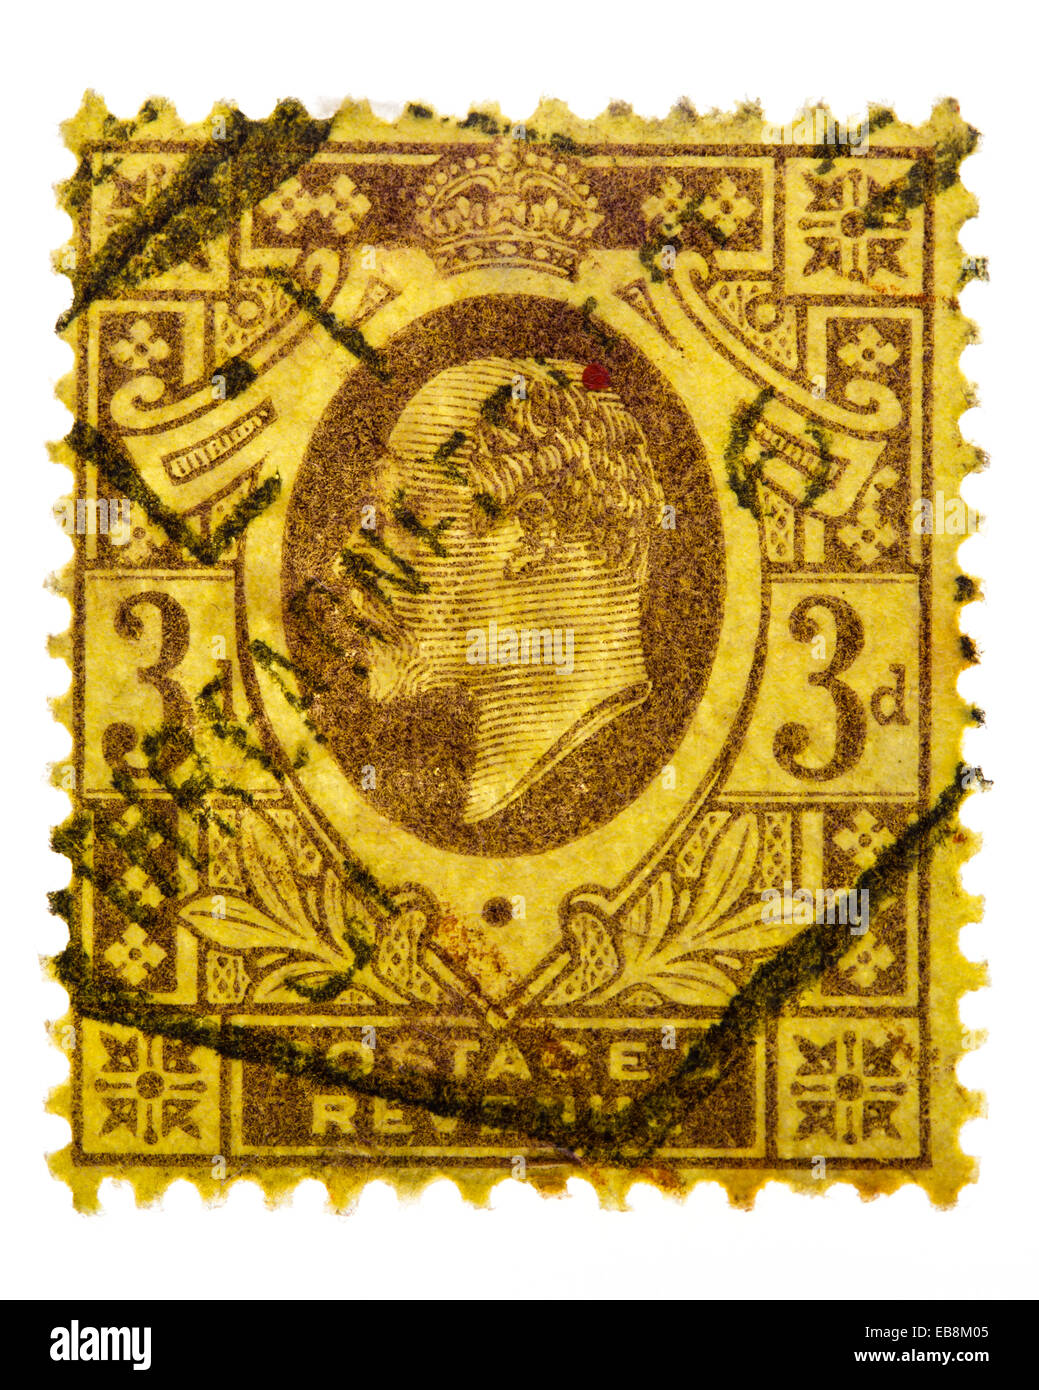 51,970 Stamp Collecting Images, Stock Photos, 3D objects, & Vectors